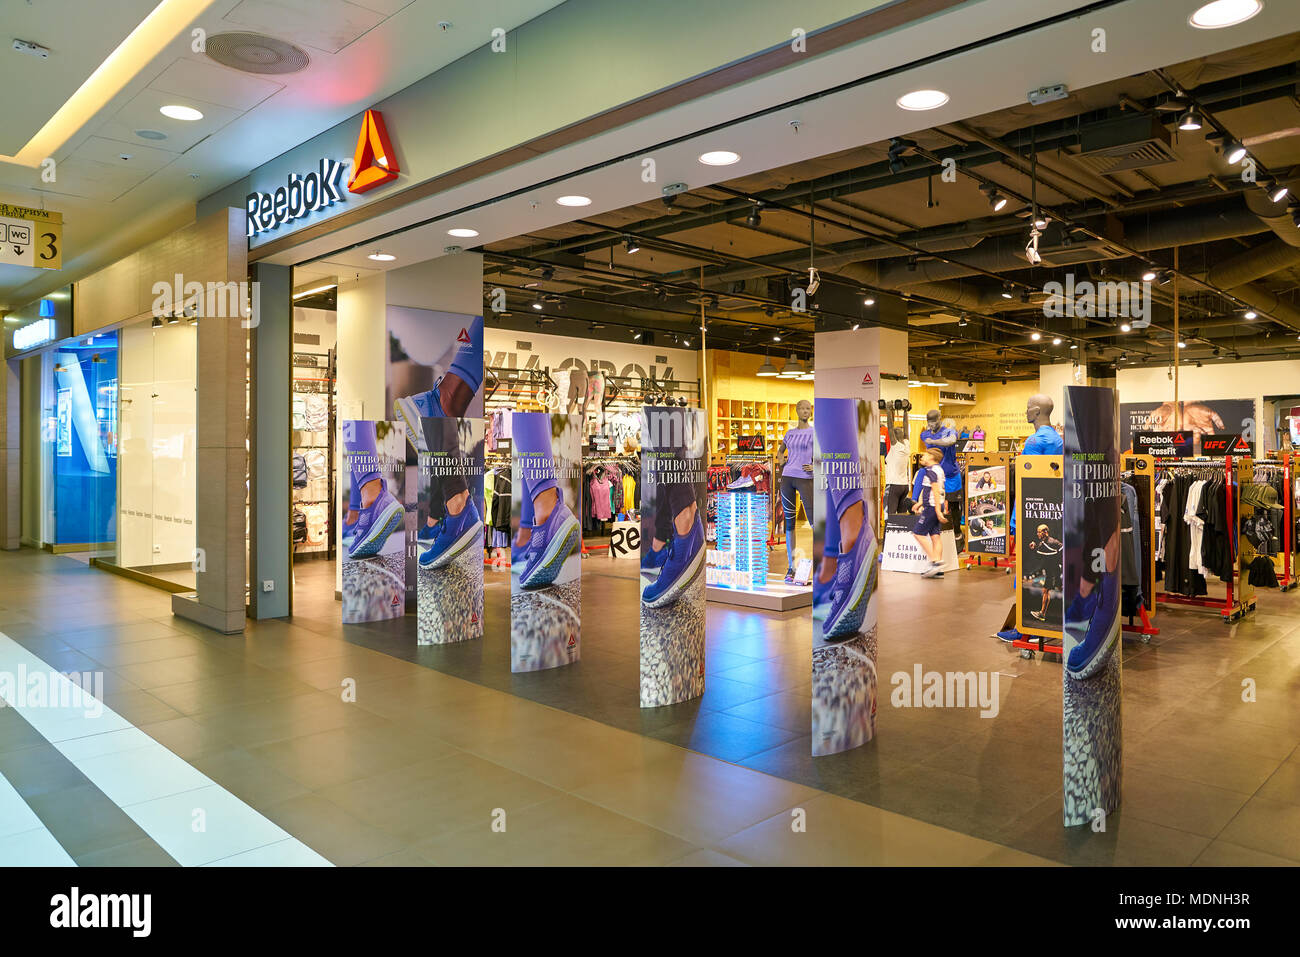 SAINT PETERSBURG, RUSSIA - CIRCA AUGUST, 2017: Reebok store at Galeria shopping center. Reebok is a global athletic footwear and apparel company Stock Photo -